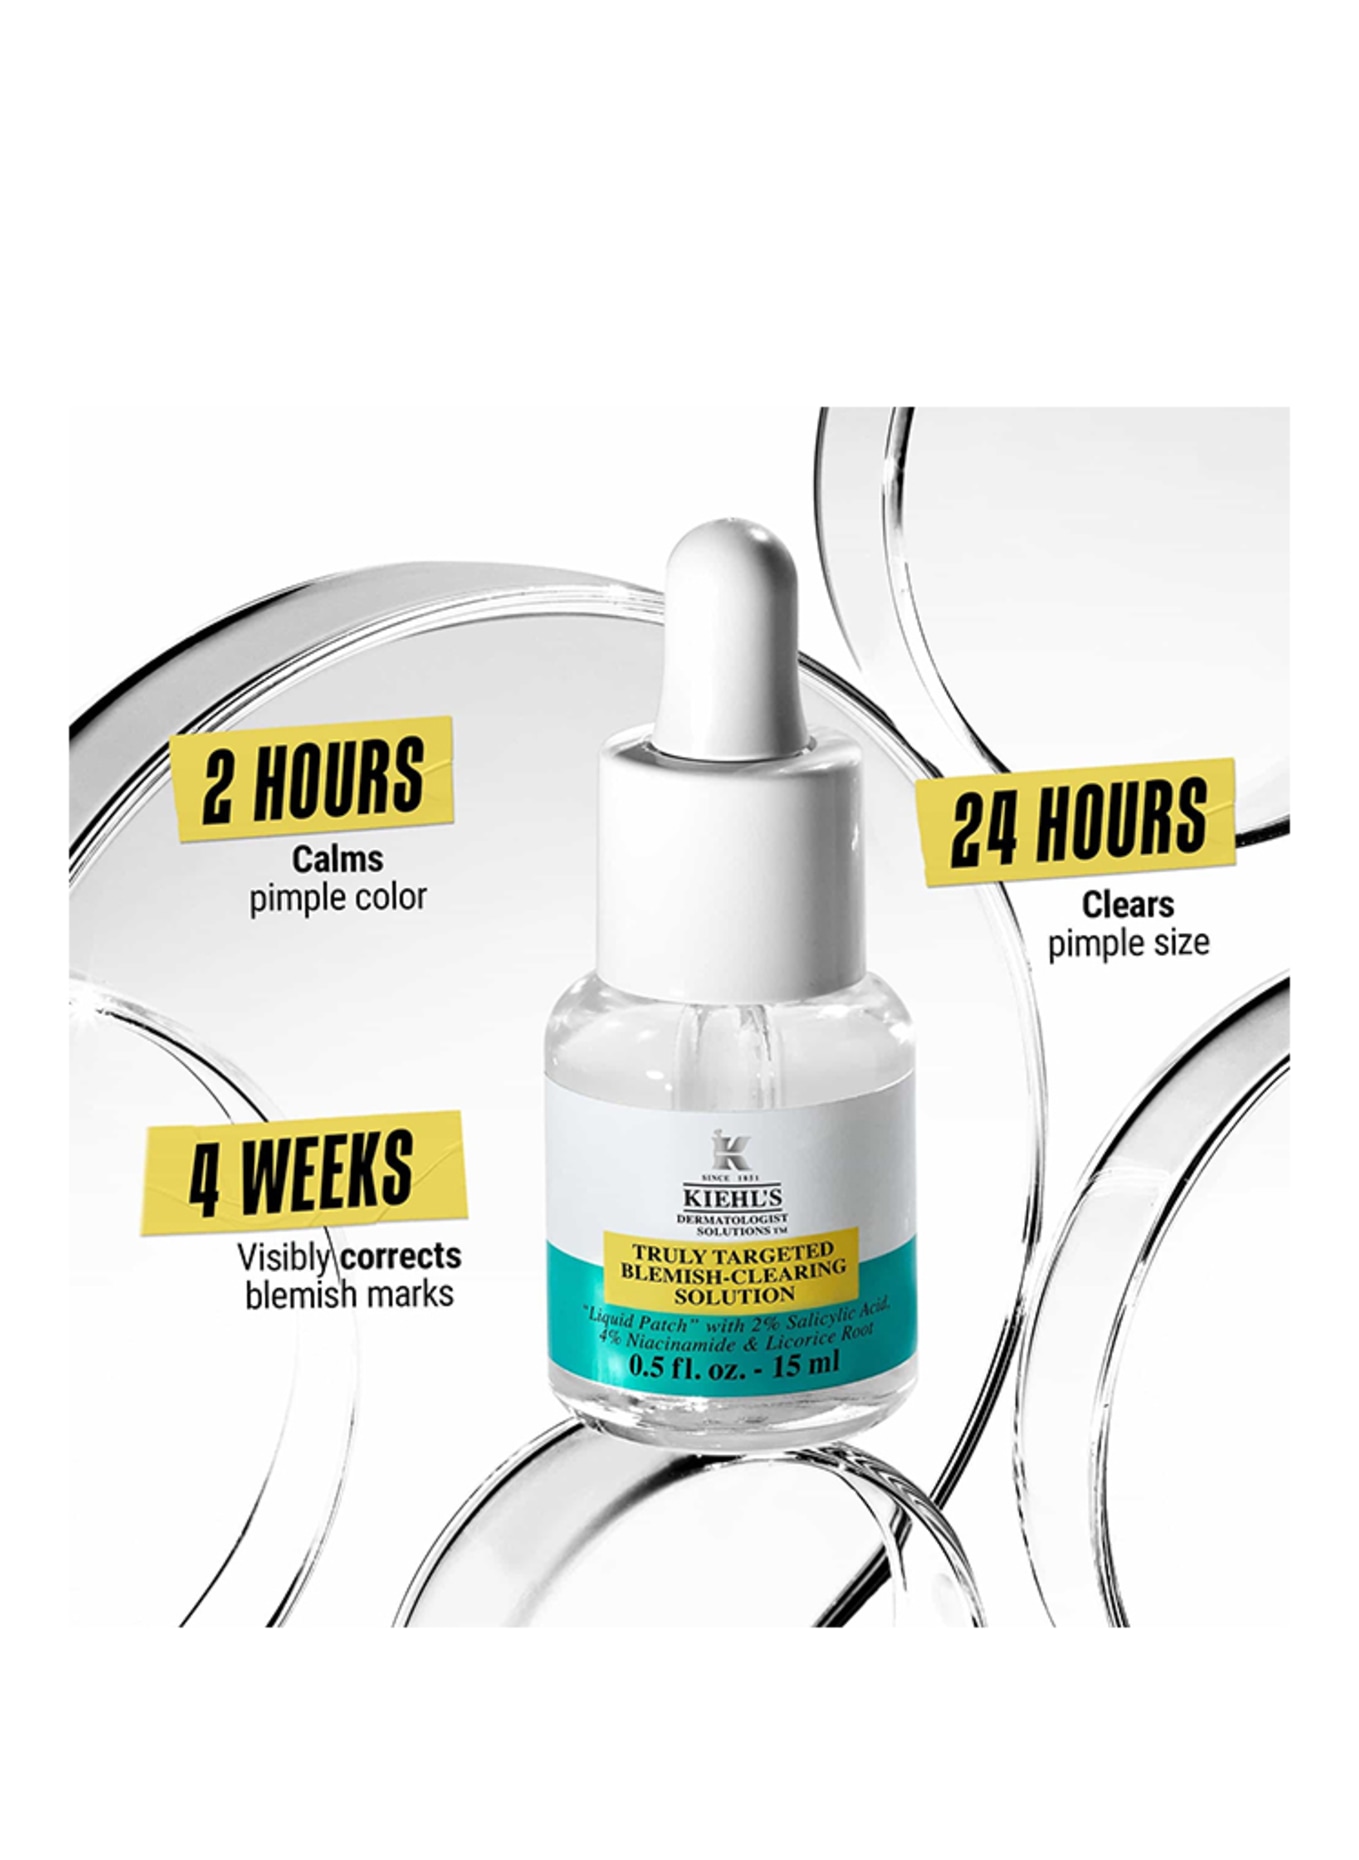 Kiehl's TRULY TARGETED BLEMISH CLEARING SOLUTION (Obrázek 5)